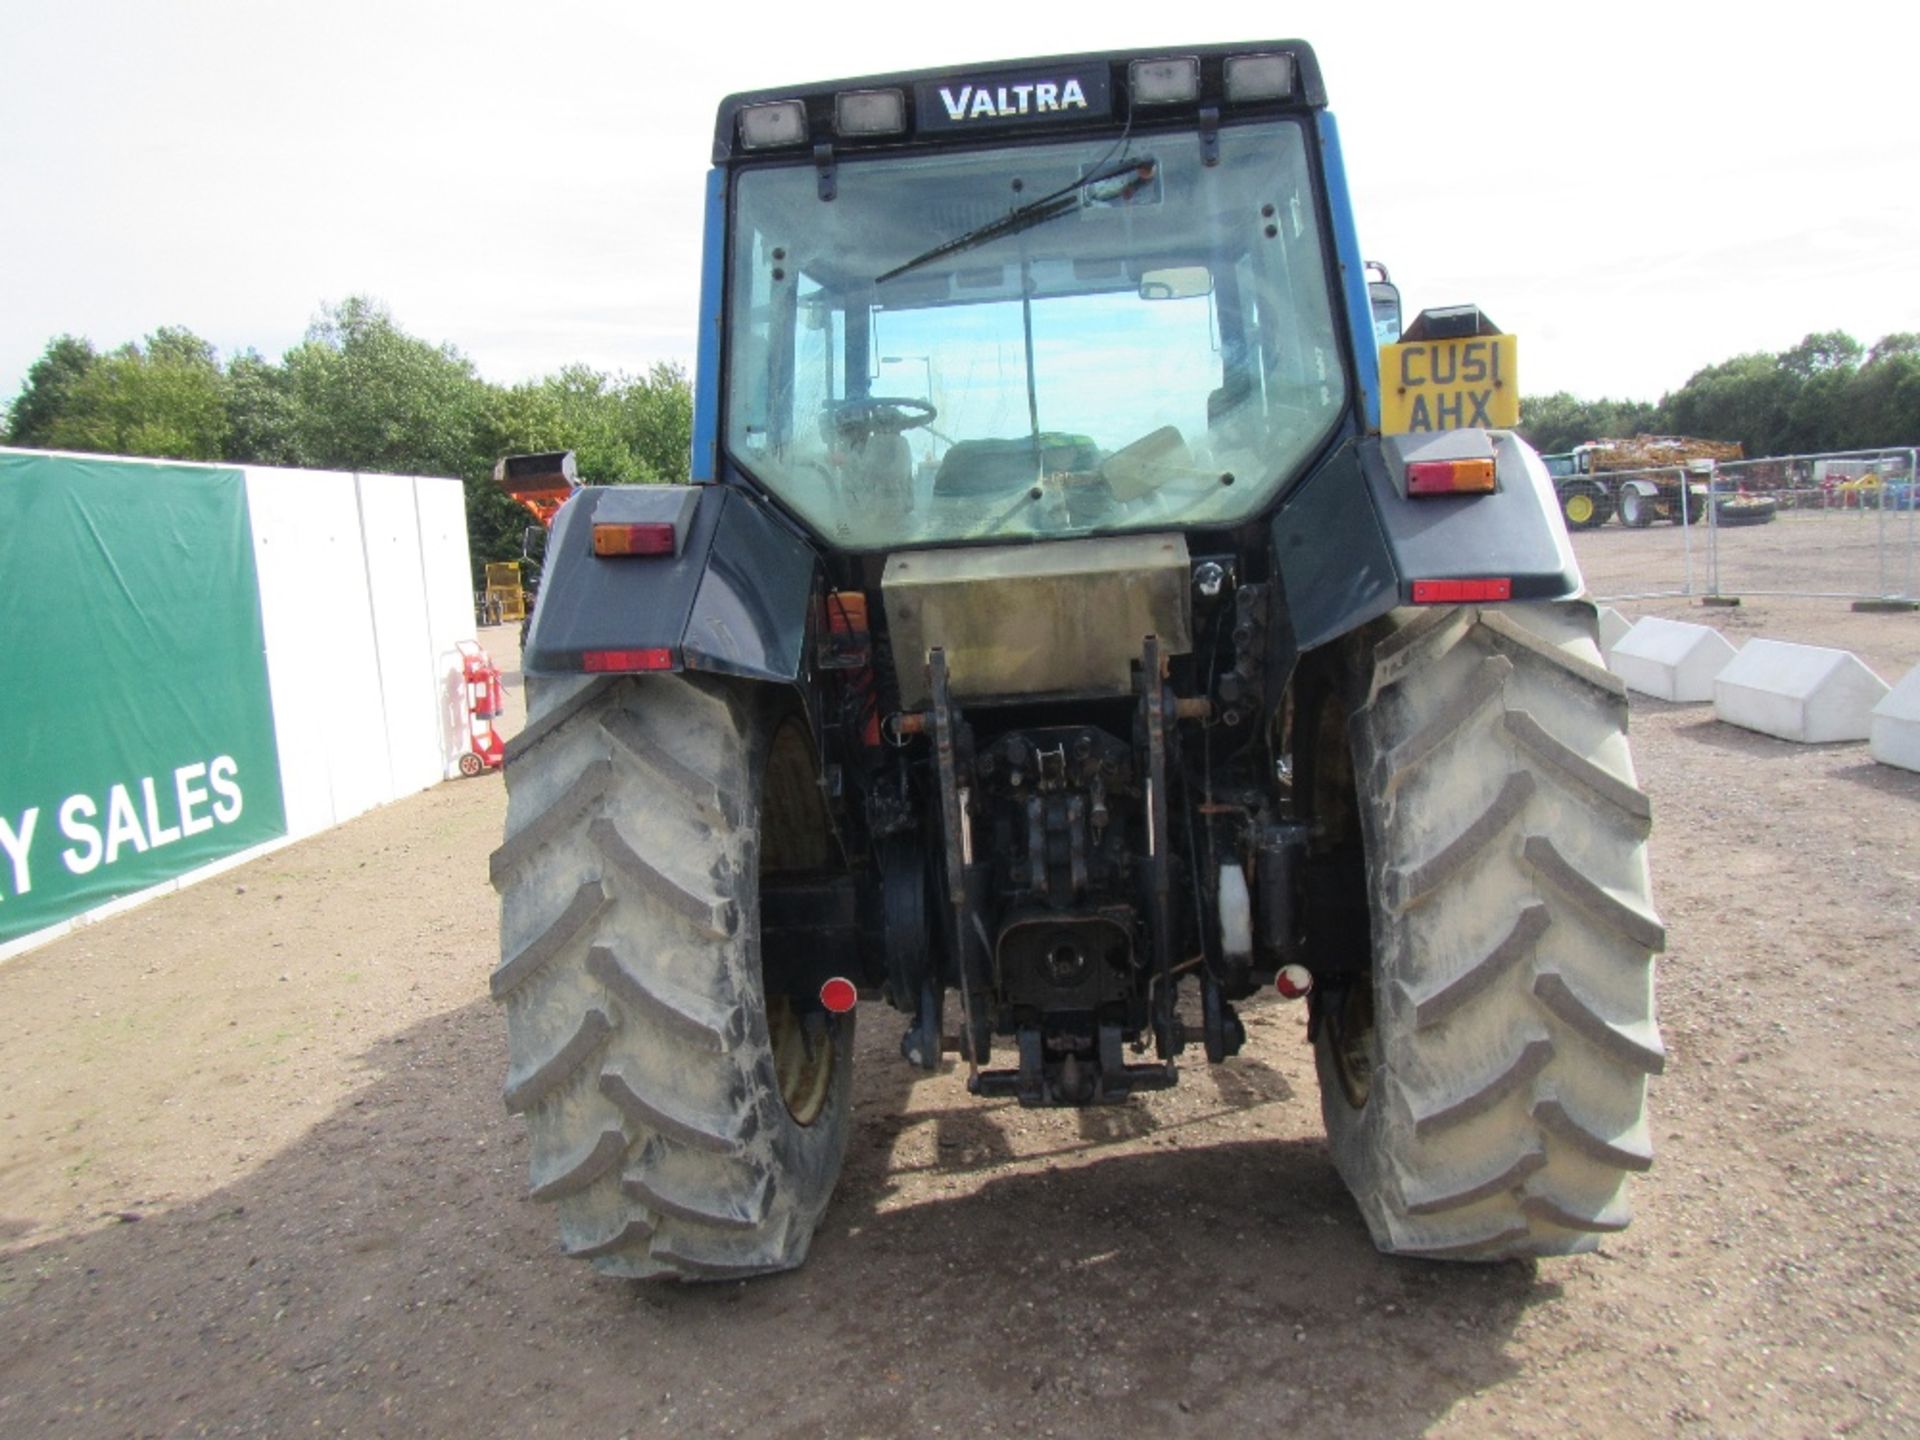 Valmet 8350-4 4x4 Tractor with Reverse Drive Reg. No. CU51 AHX Ser No 235521 - Image 7 of 19